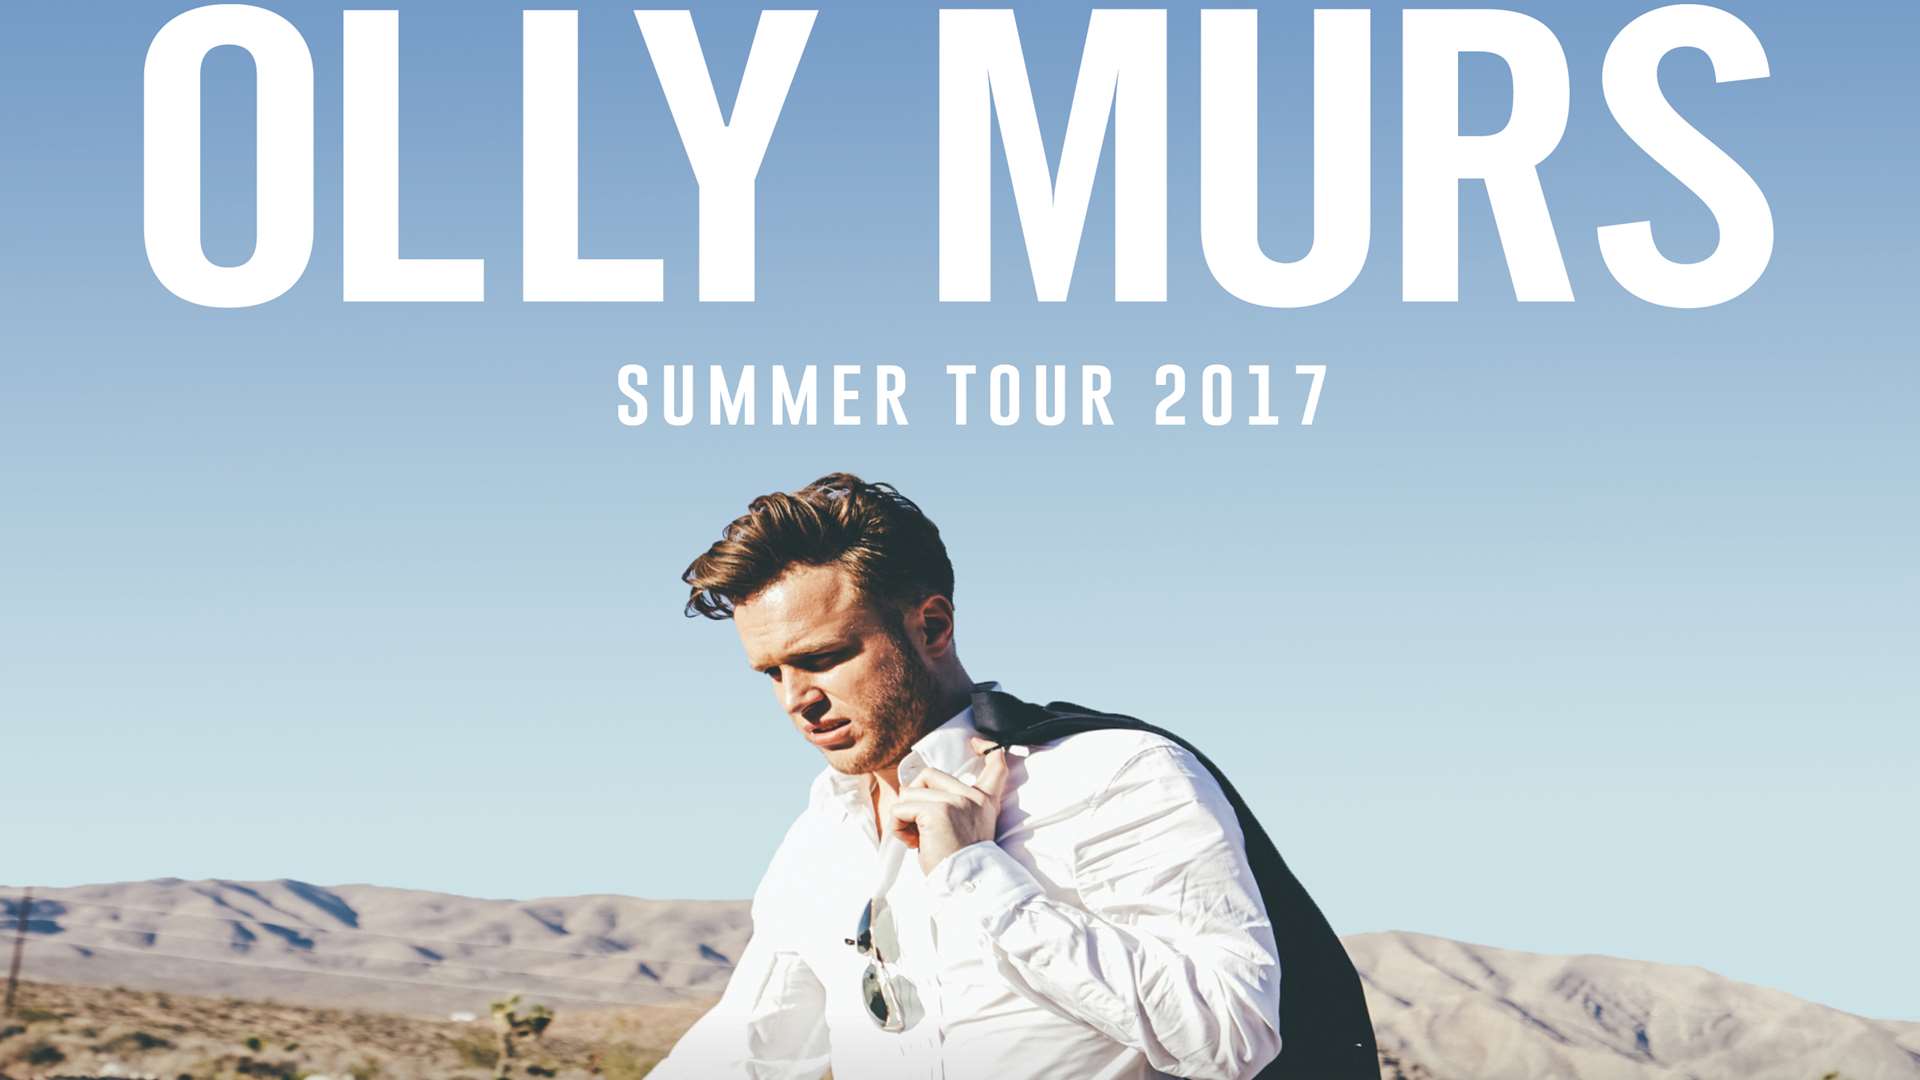 Olly Murs will be playing in Kent in the summer of 2017